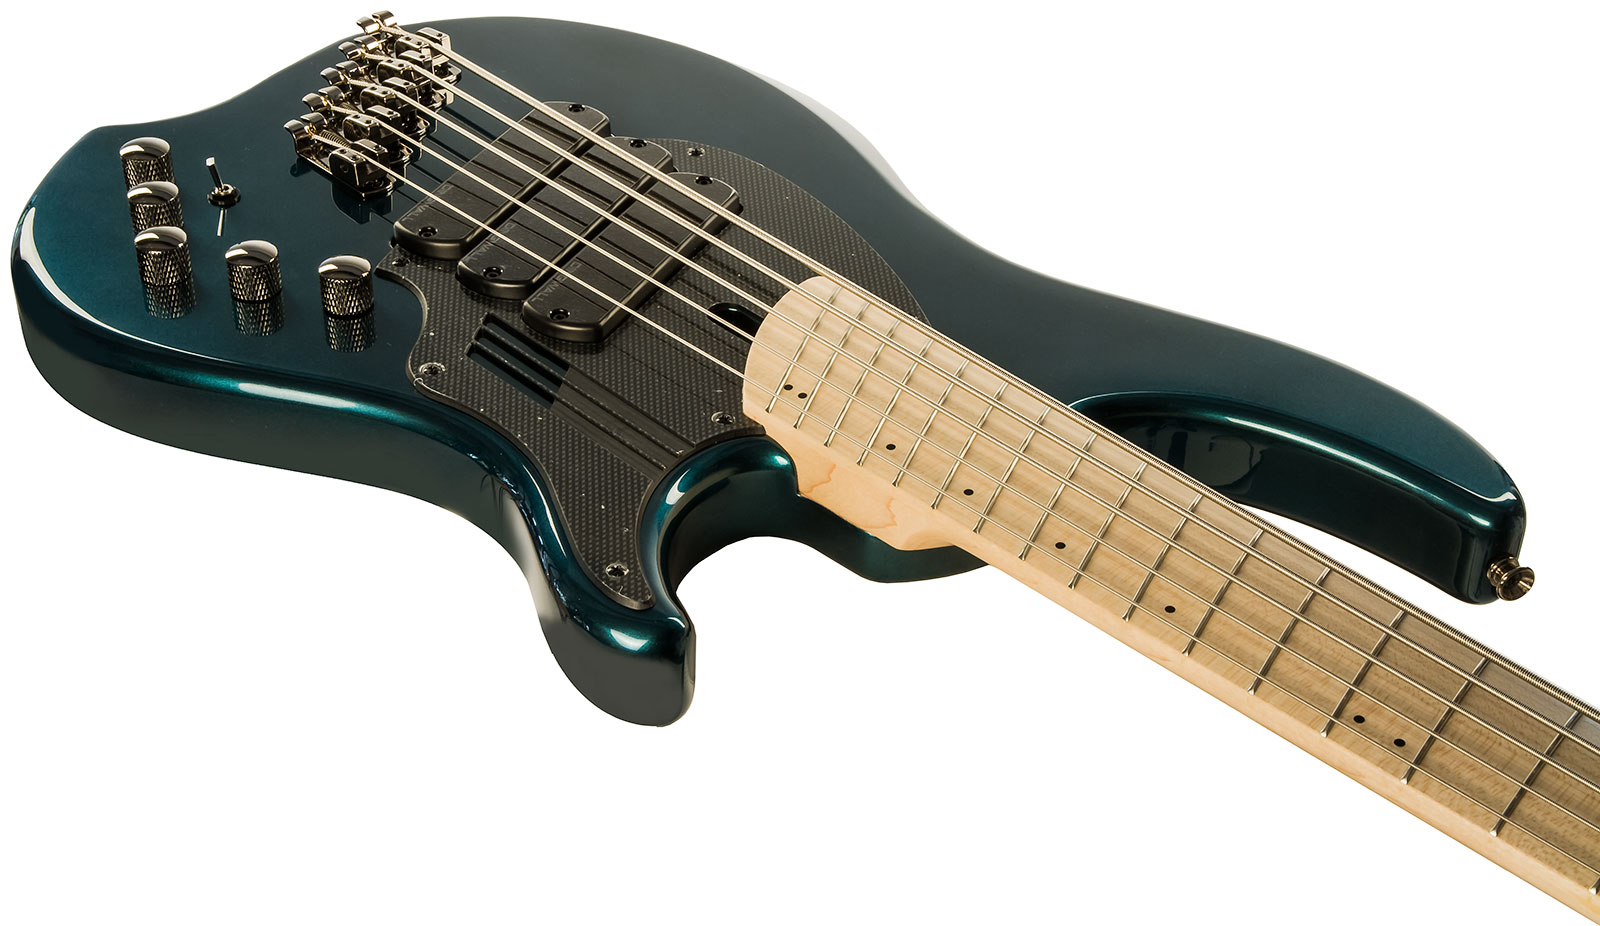 Dingwall Adam Nolly Getgood Ng3 5c Signature 3pu Active Mn - Black Forrest Green - Solid body electric bass - Variation 2